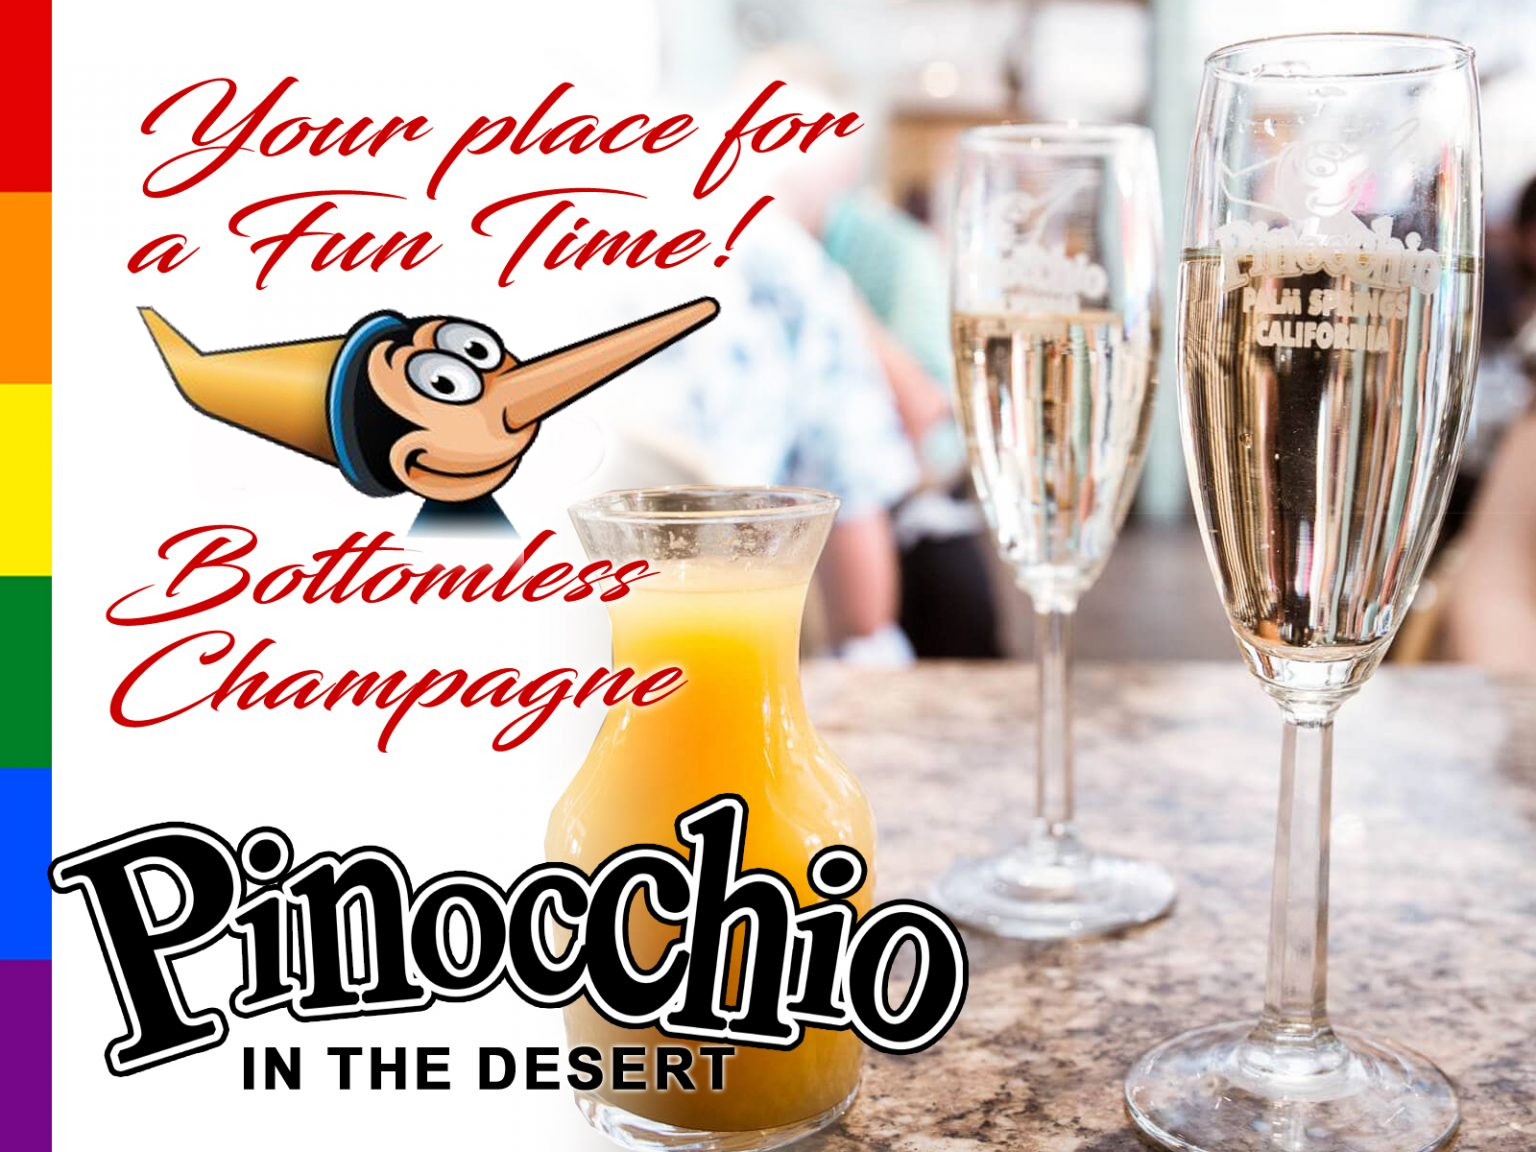 Pinocchio's your place for a FUN TIME!